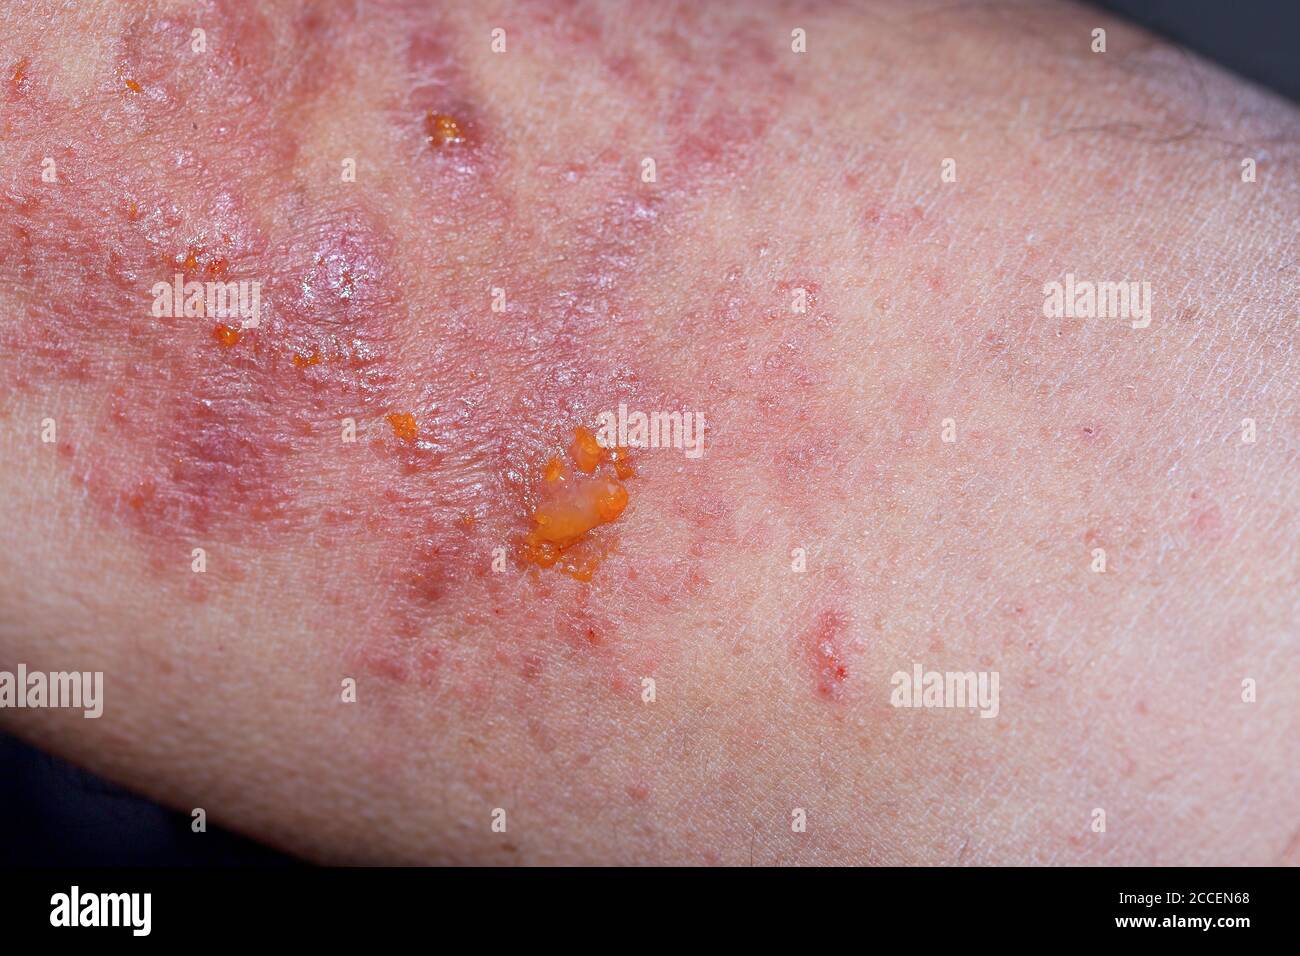 Extreme close-up photography of the atopic dermatitis symptoms on  the left elbow pit of an adult male in a very advance stage. Stock Photo